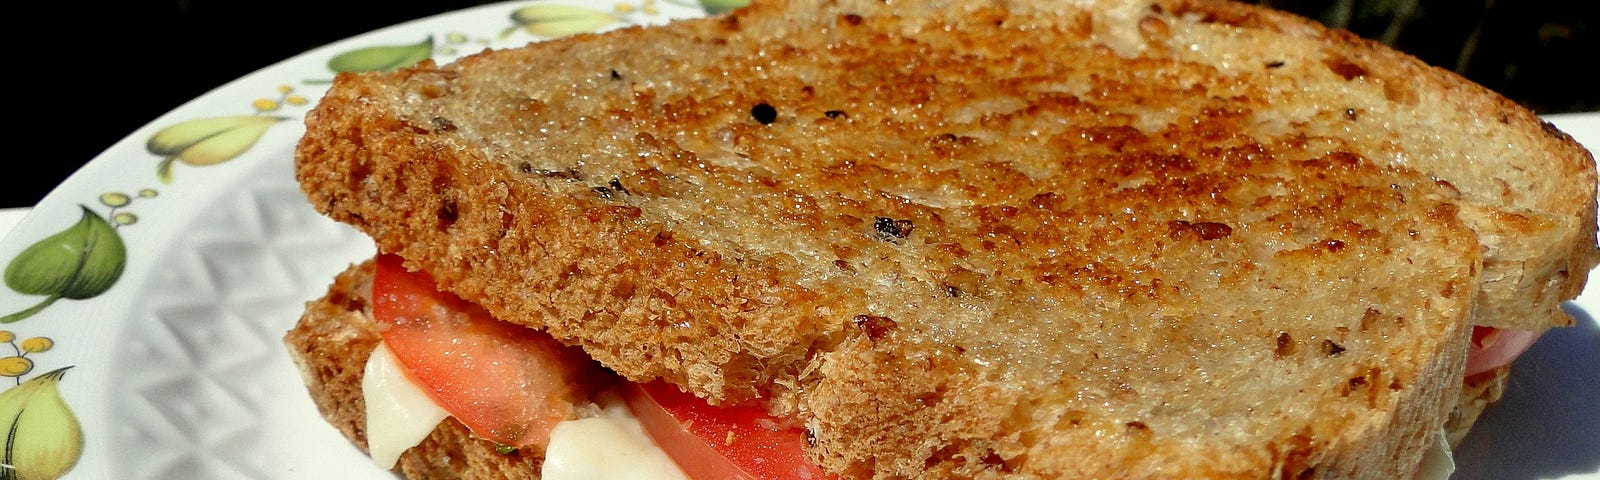 Photo of a grilled tomato and cheese sandwich